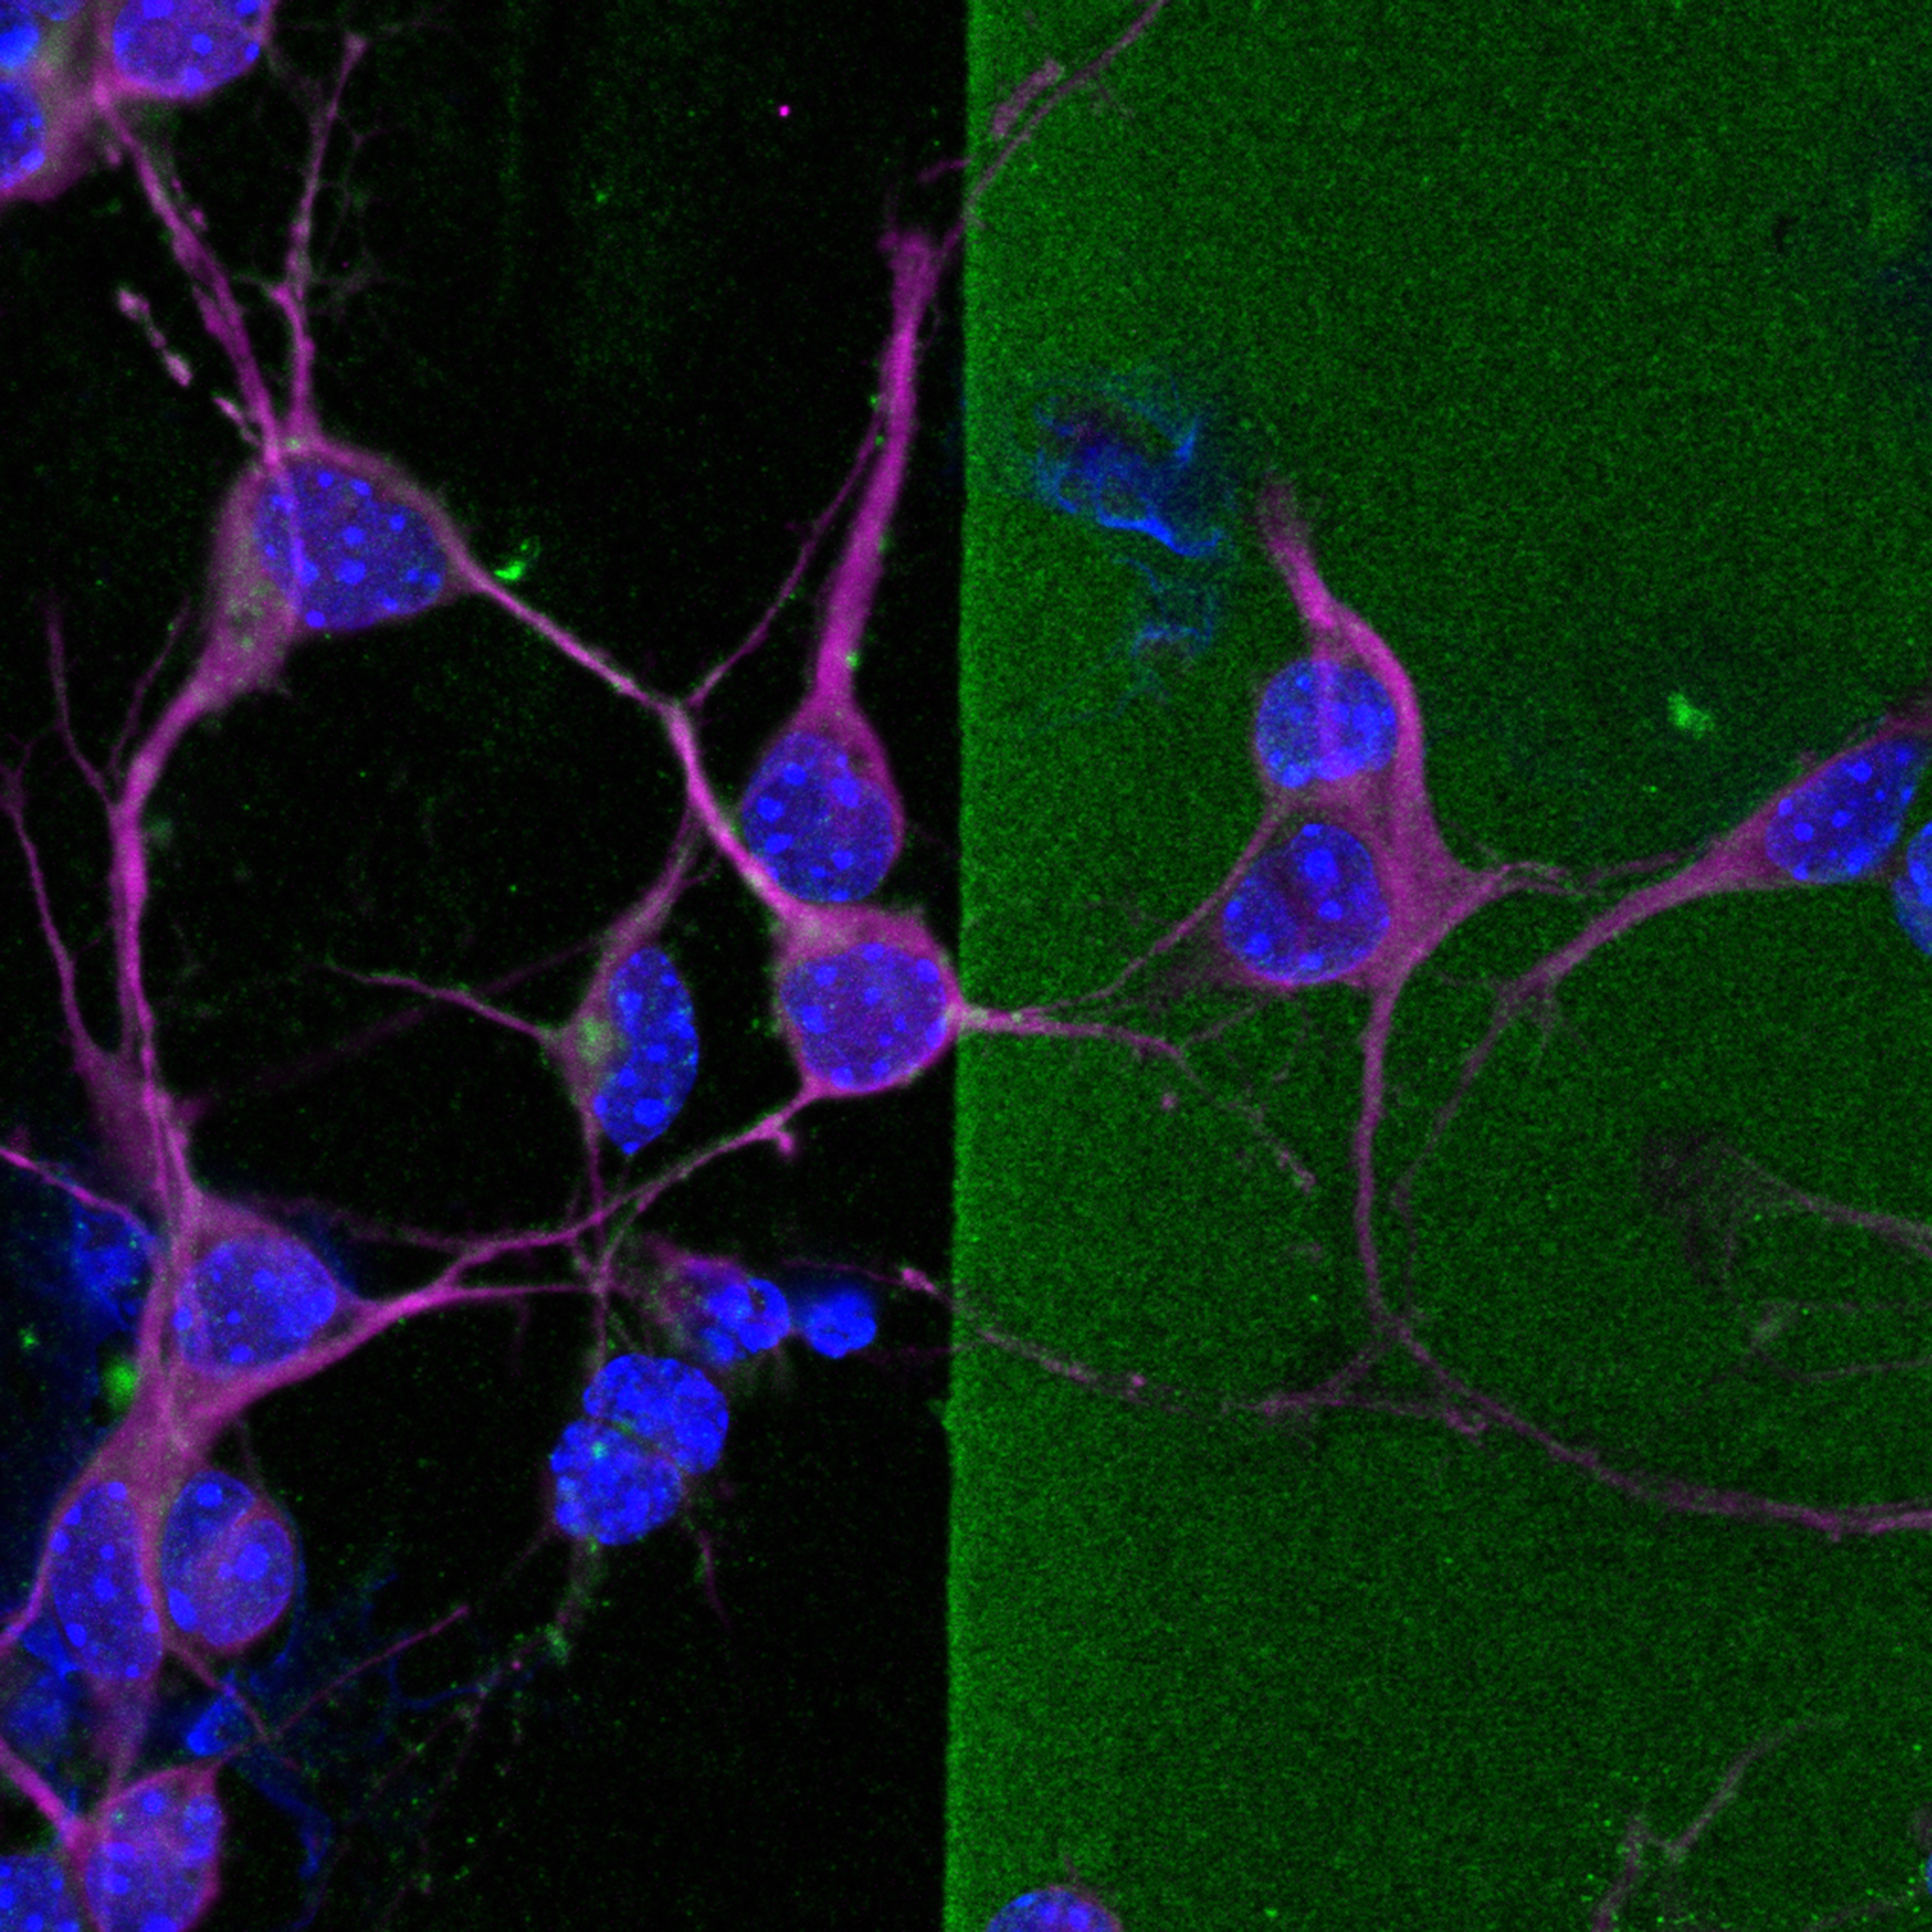 MAP2+ (magenta) neurites from cultured immature cortical neurons extending into a stripe of chondroitin sulfate proteoglycans (CSPGs; green) treated with chondroitinase ABC (chABC), an enzyme that abolishes CSPGs